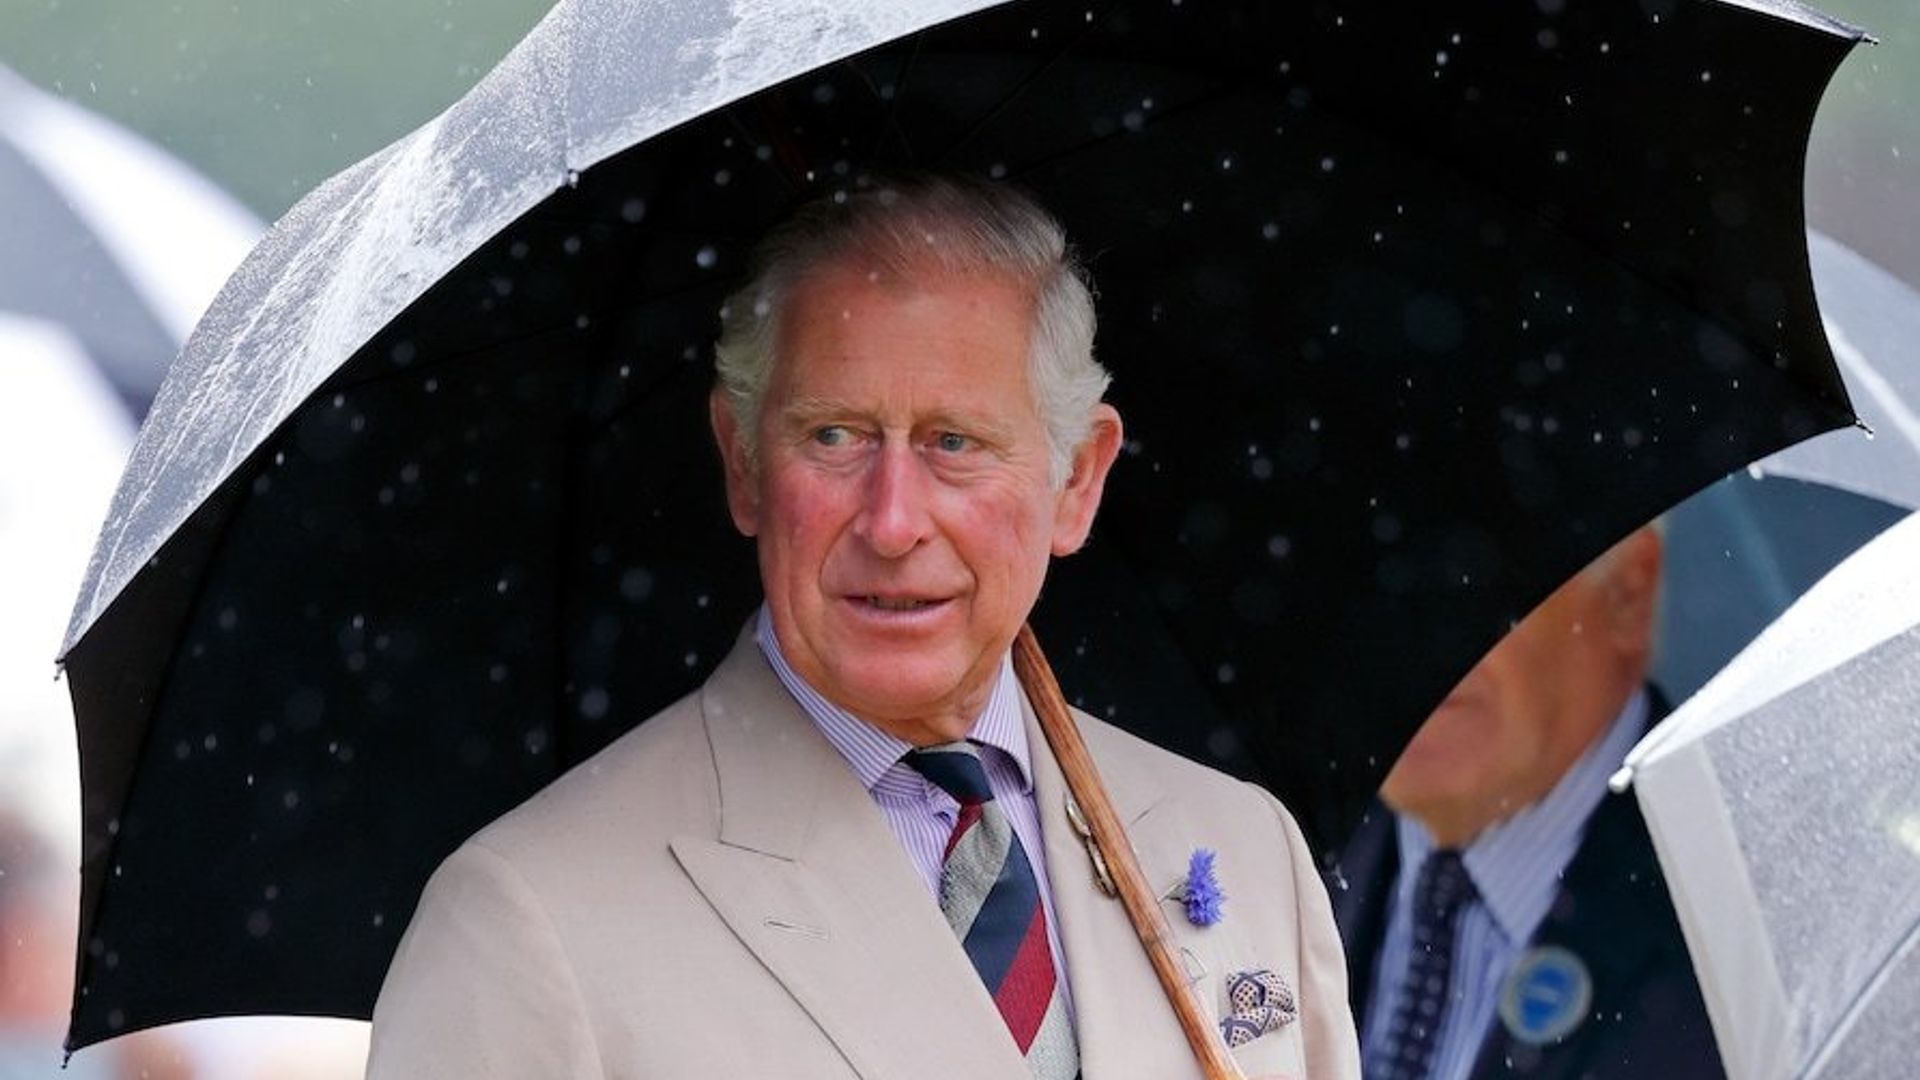 All the times Prince Charles has spoken about his love for the environment